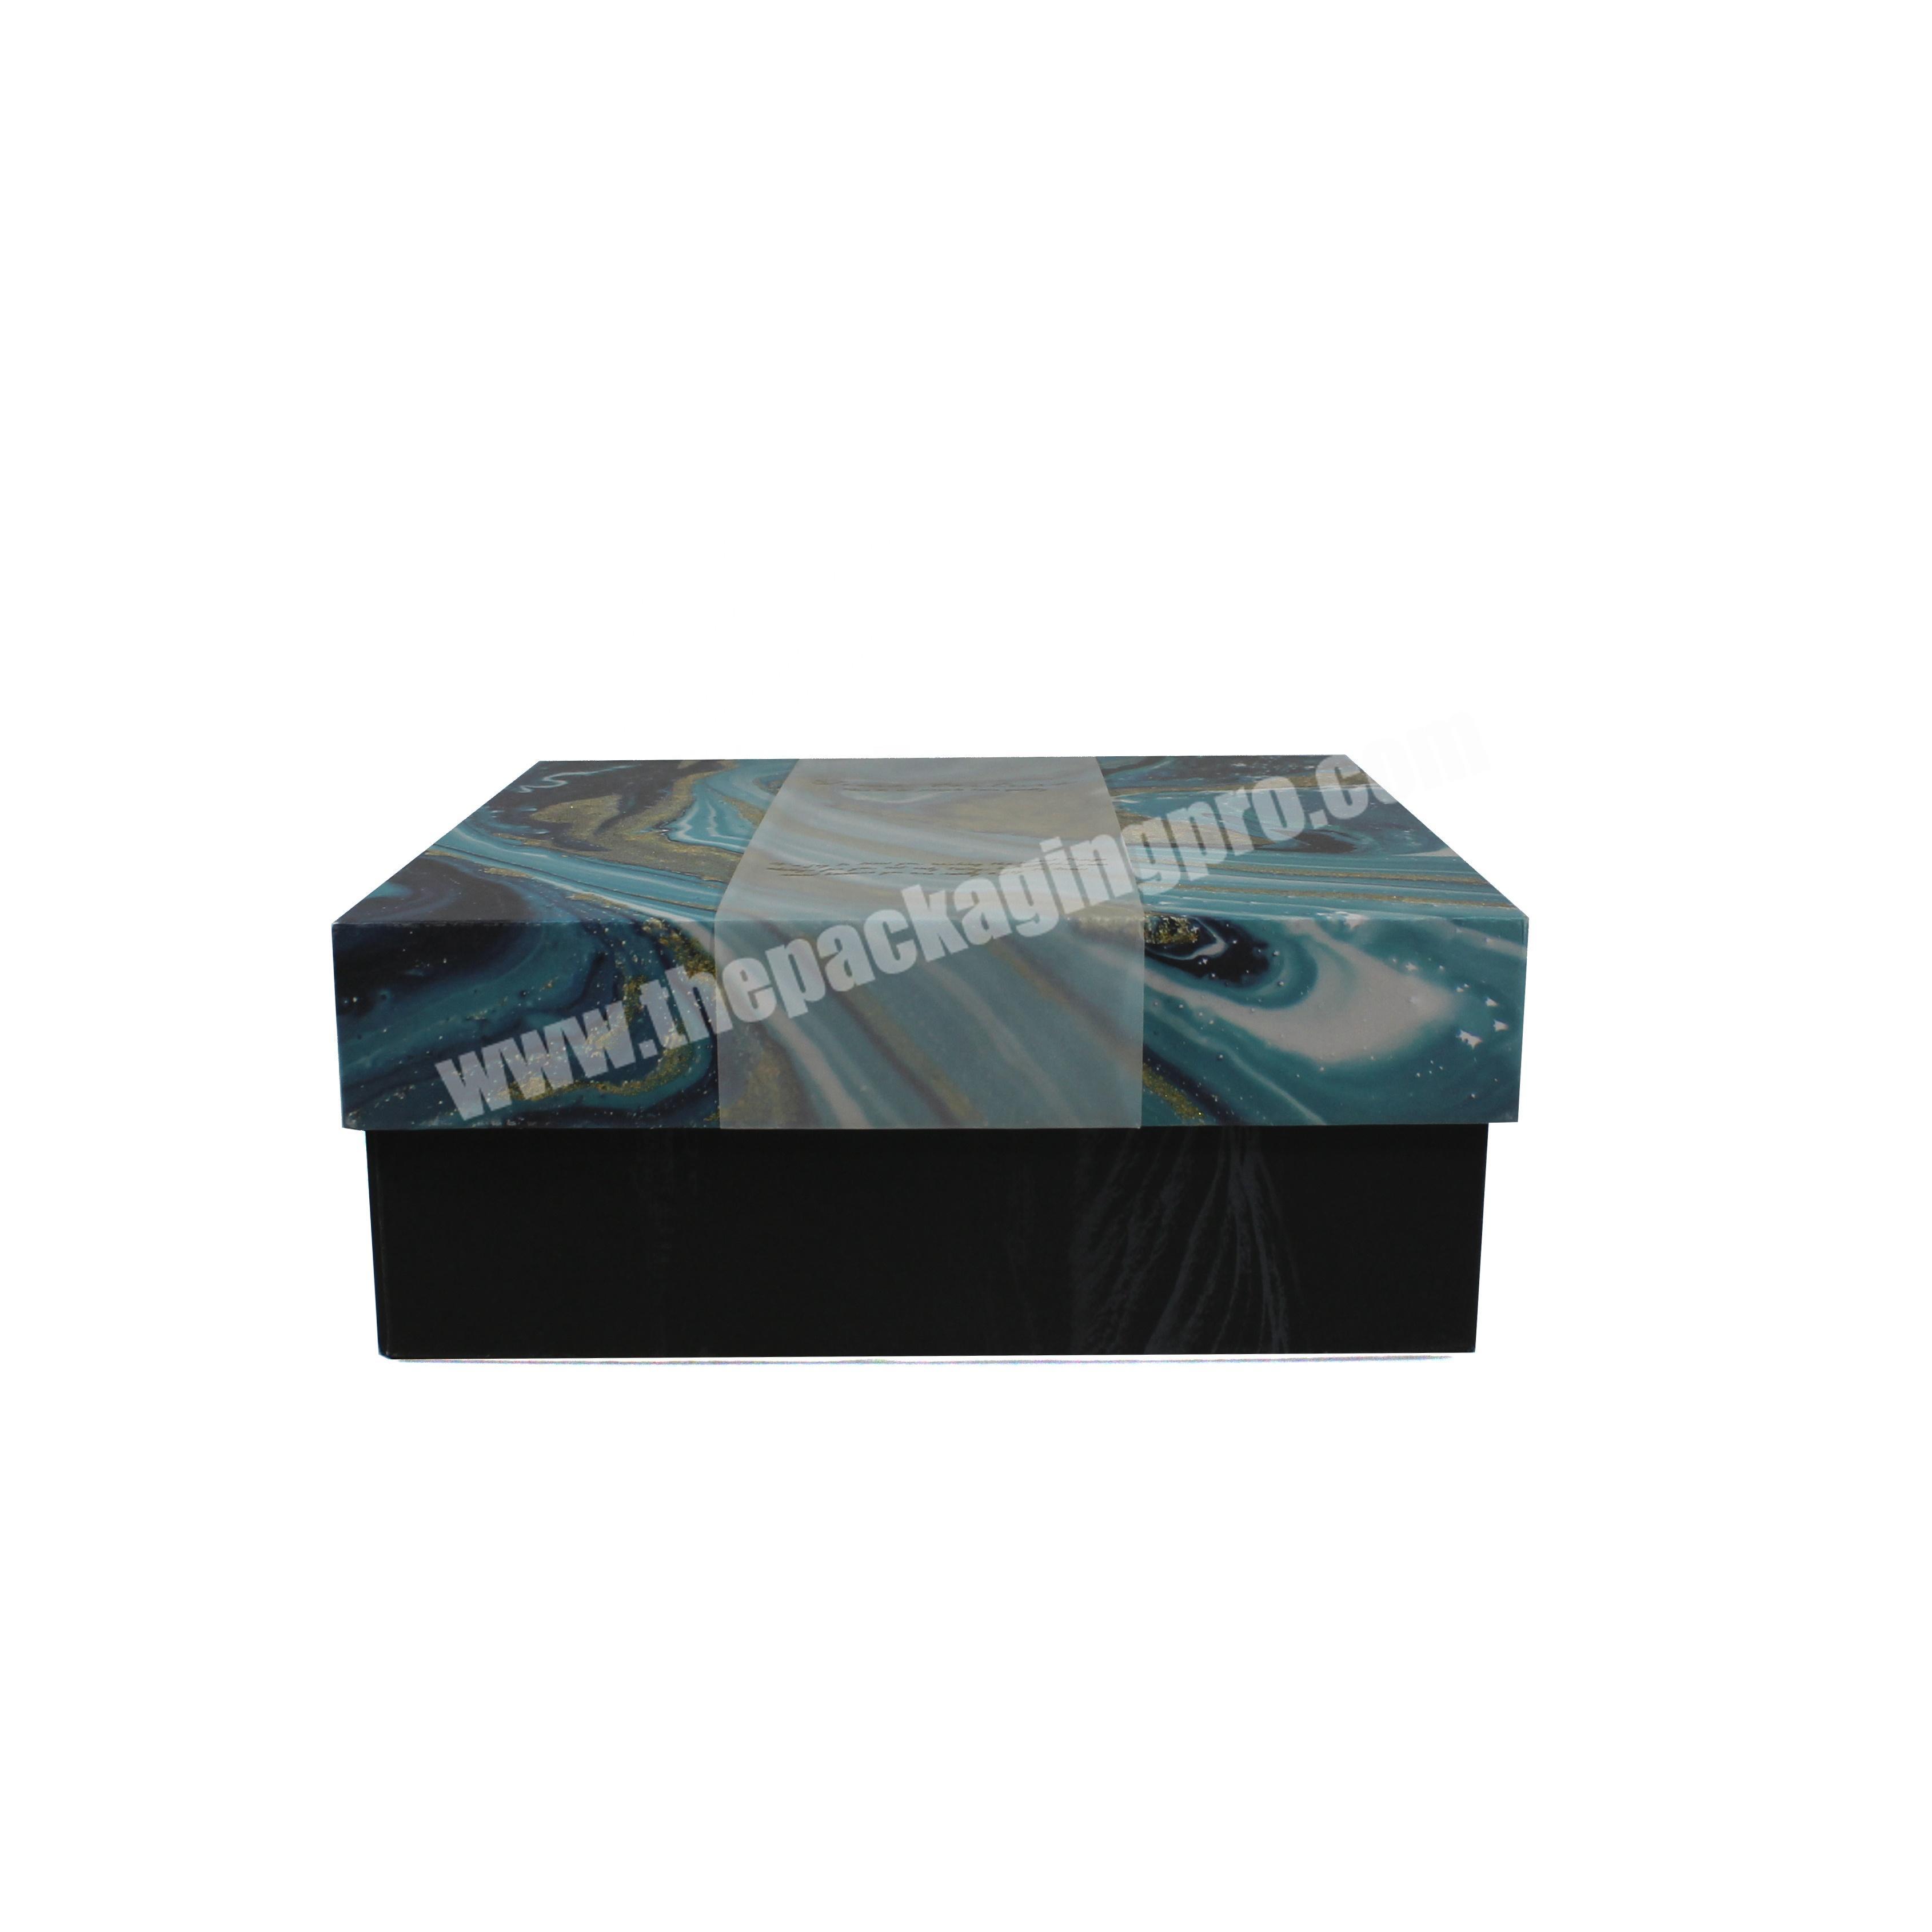 Design New trend cardboard gift box for each company